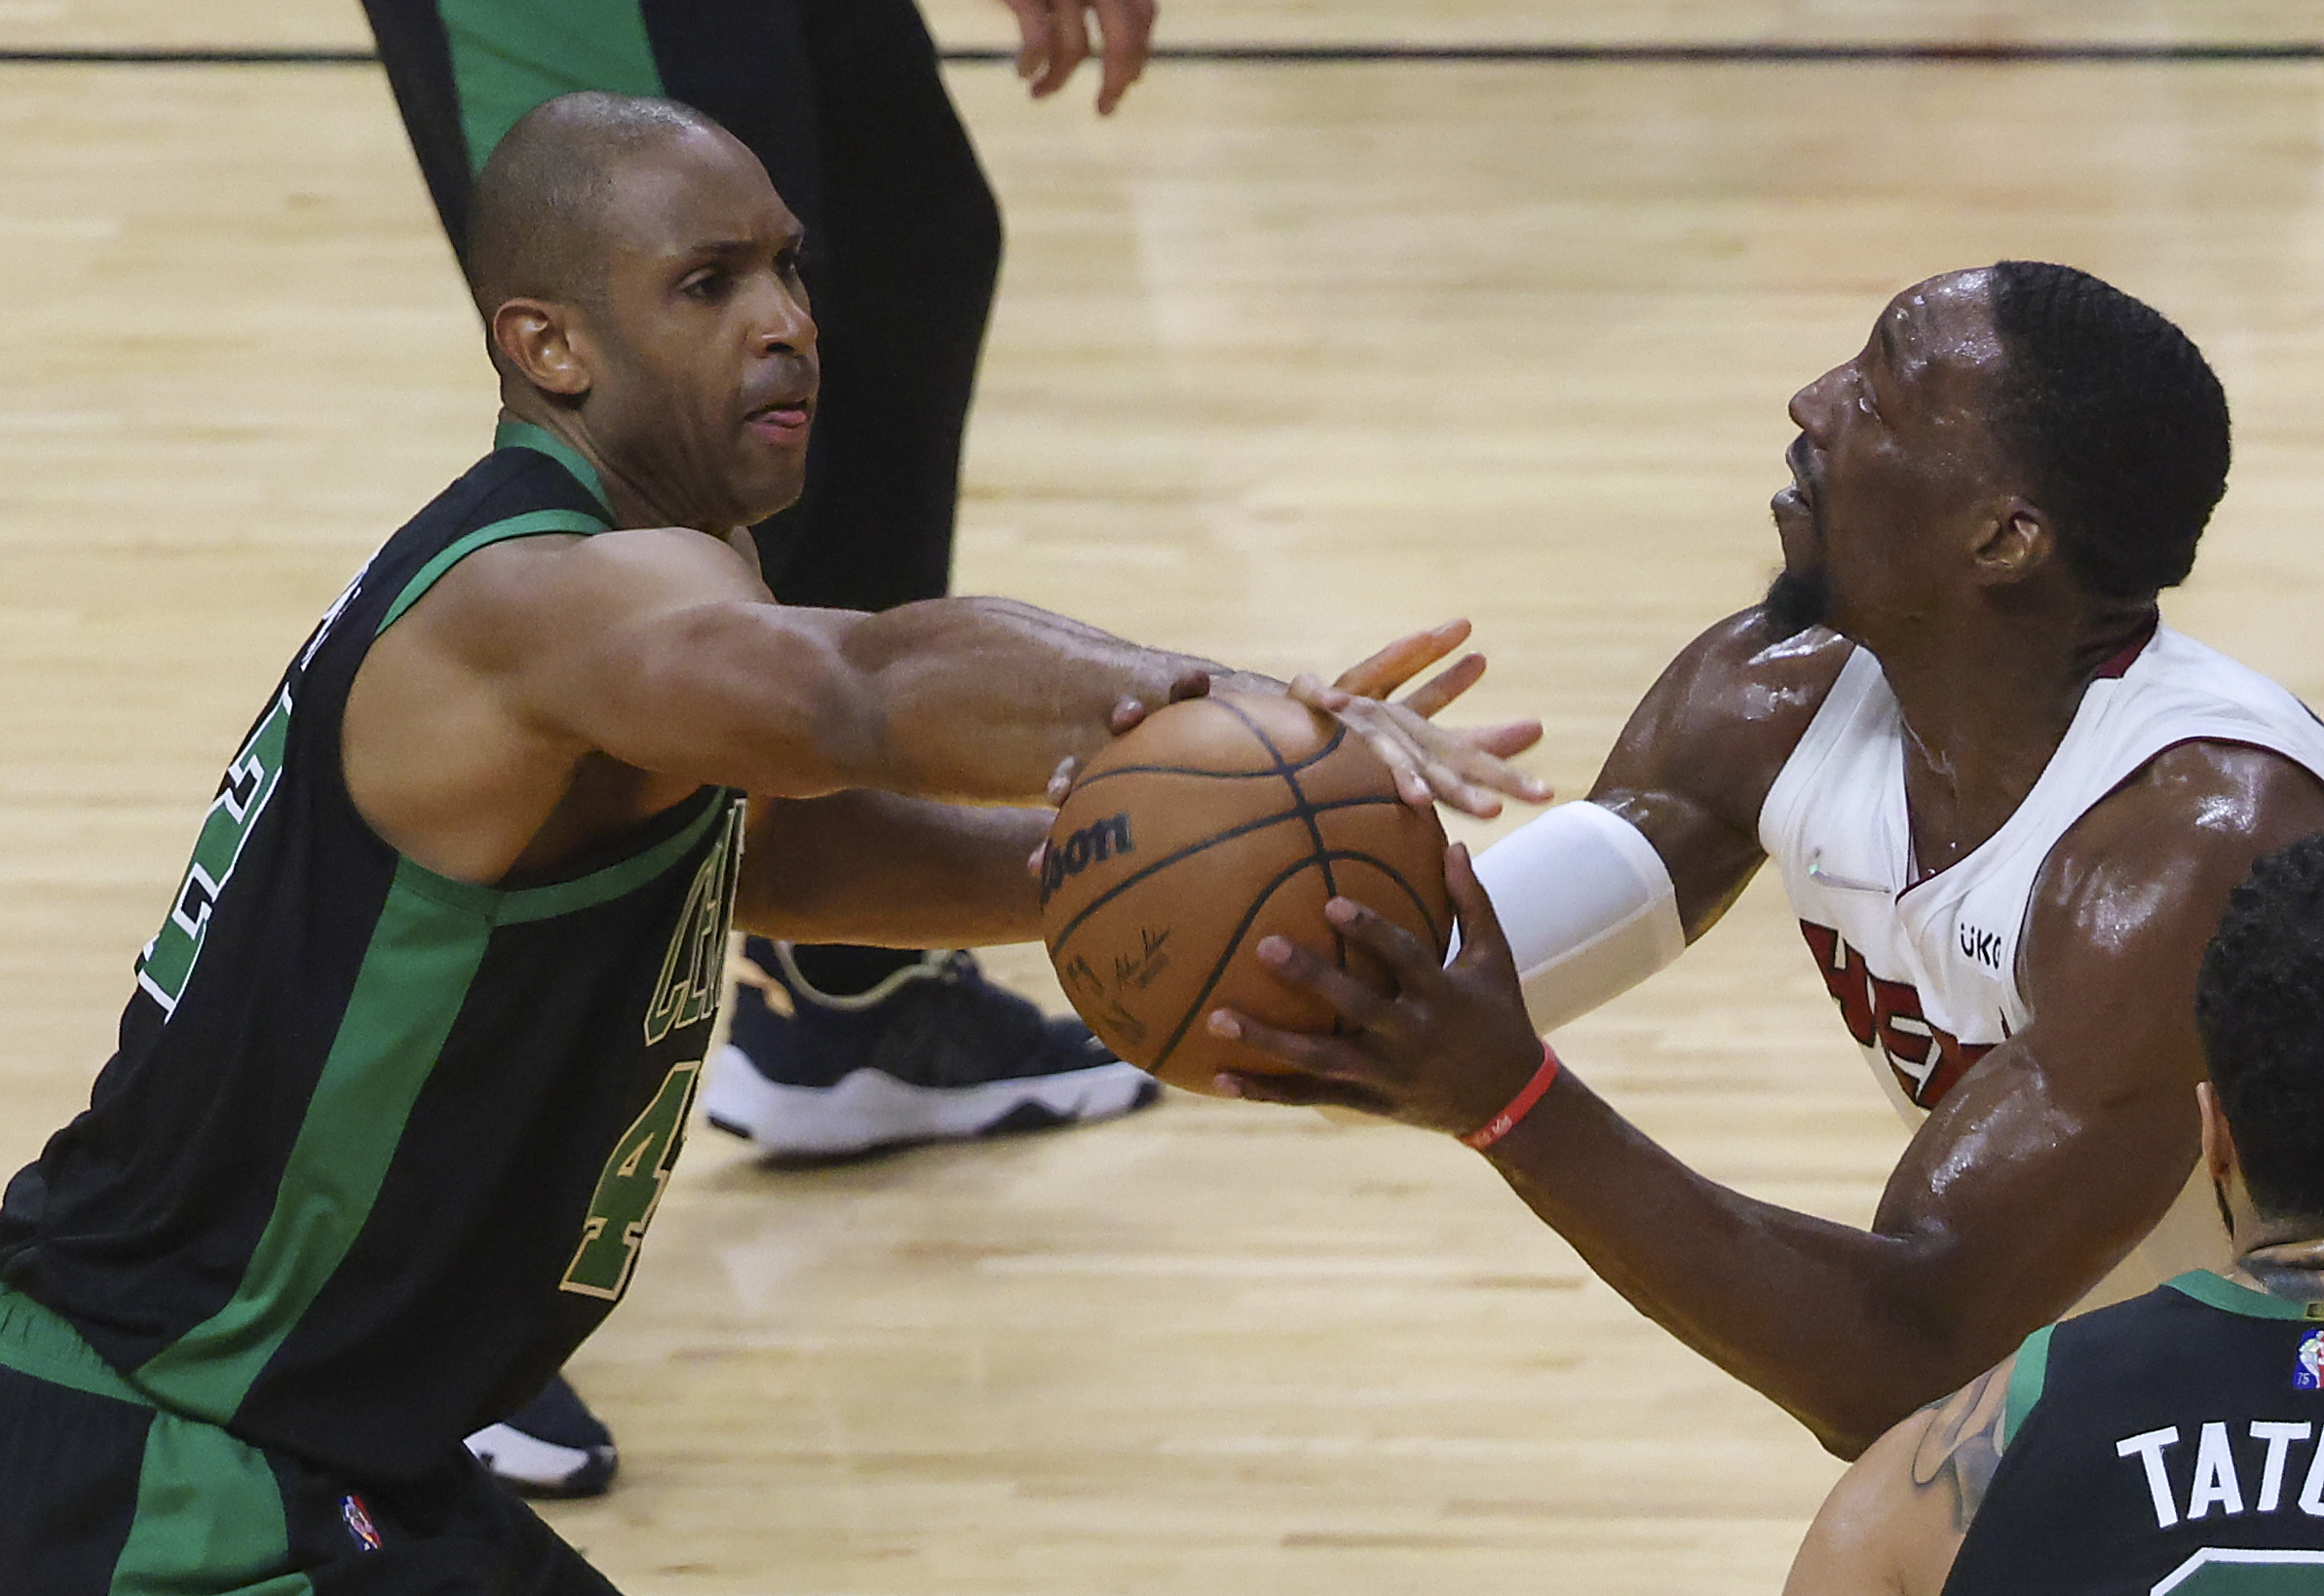 Celtics dominate Heat on the road in Game 5, and other observations as they near an NBA Finals berth